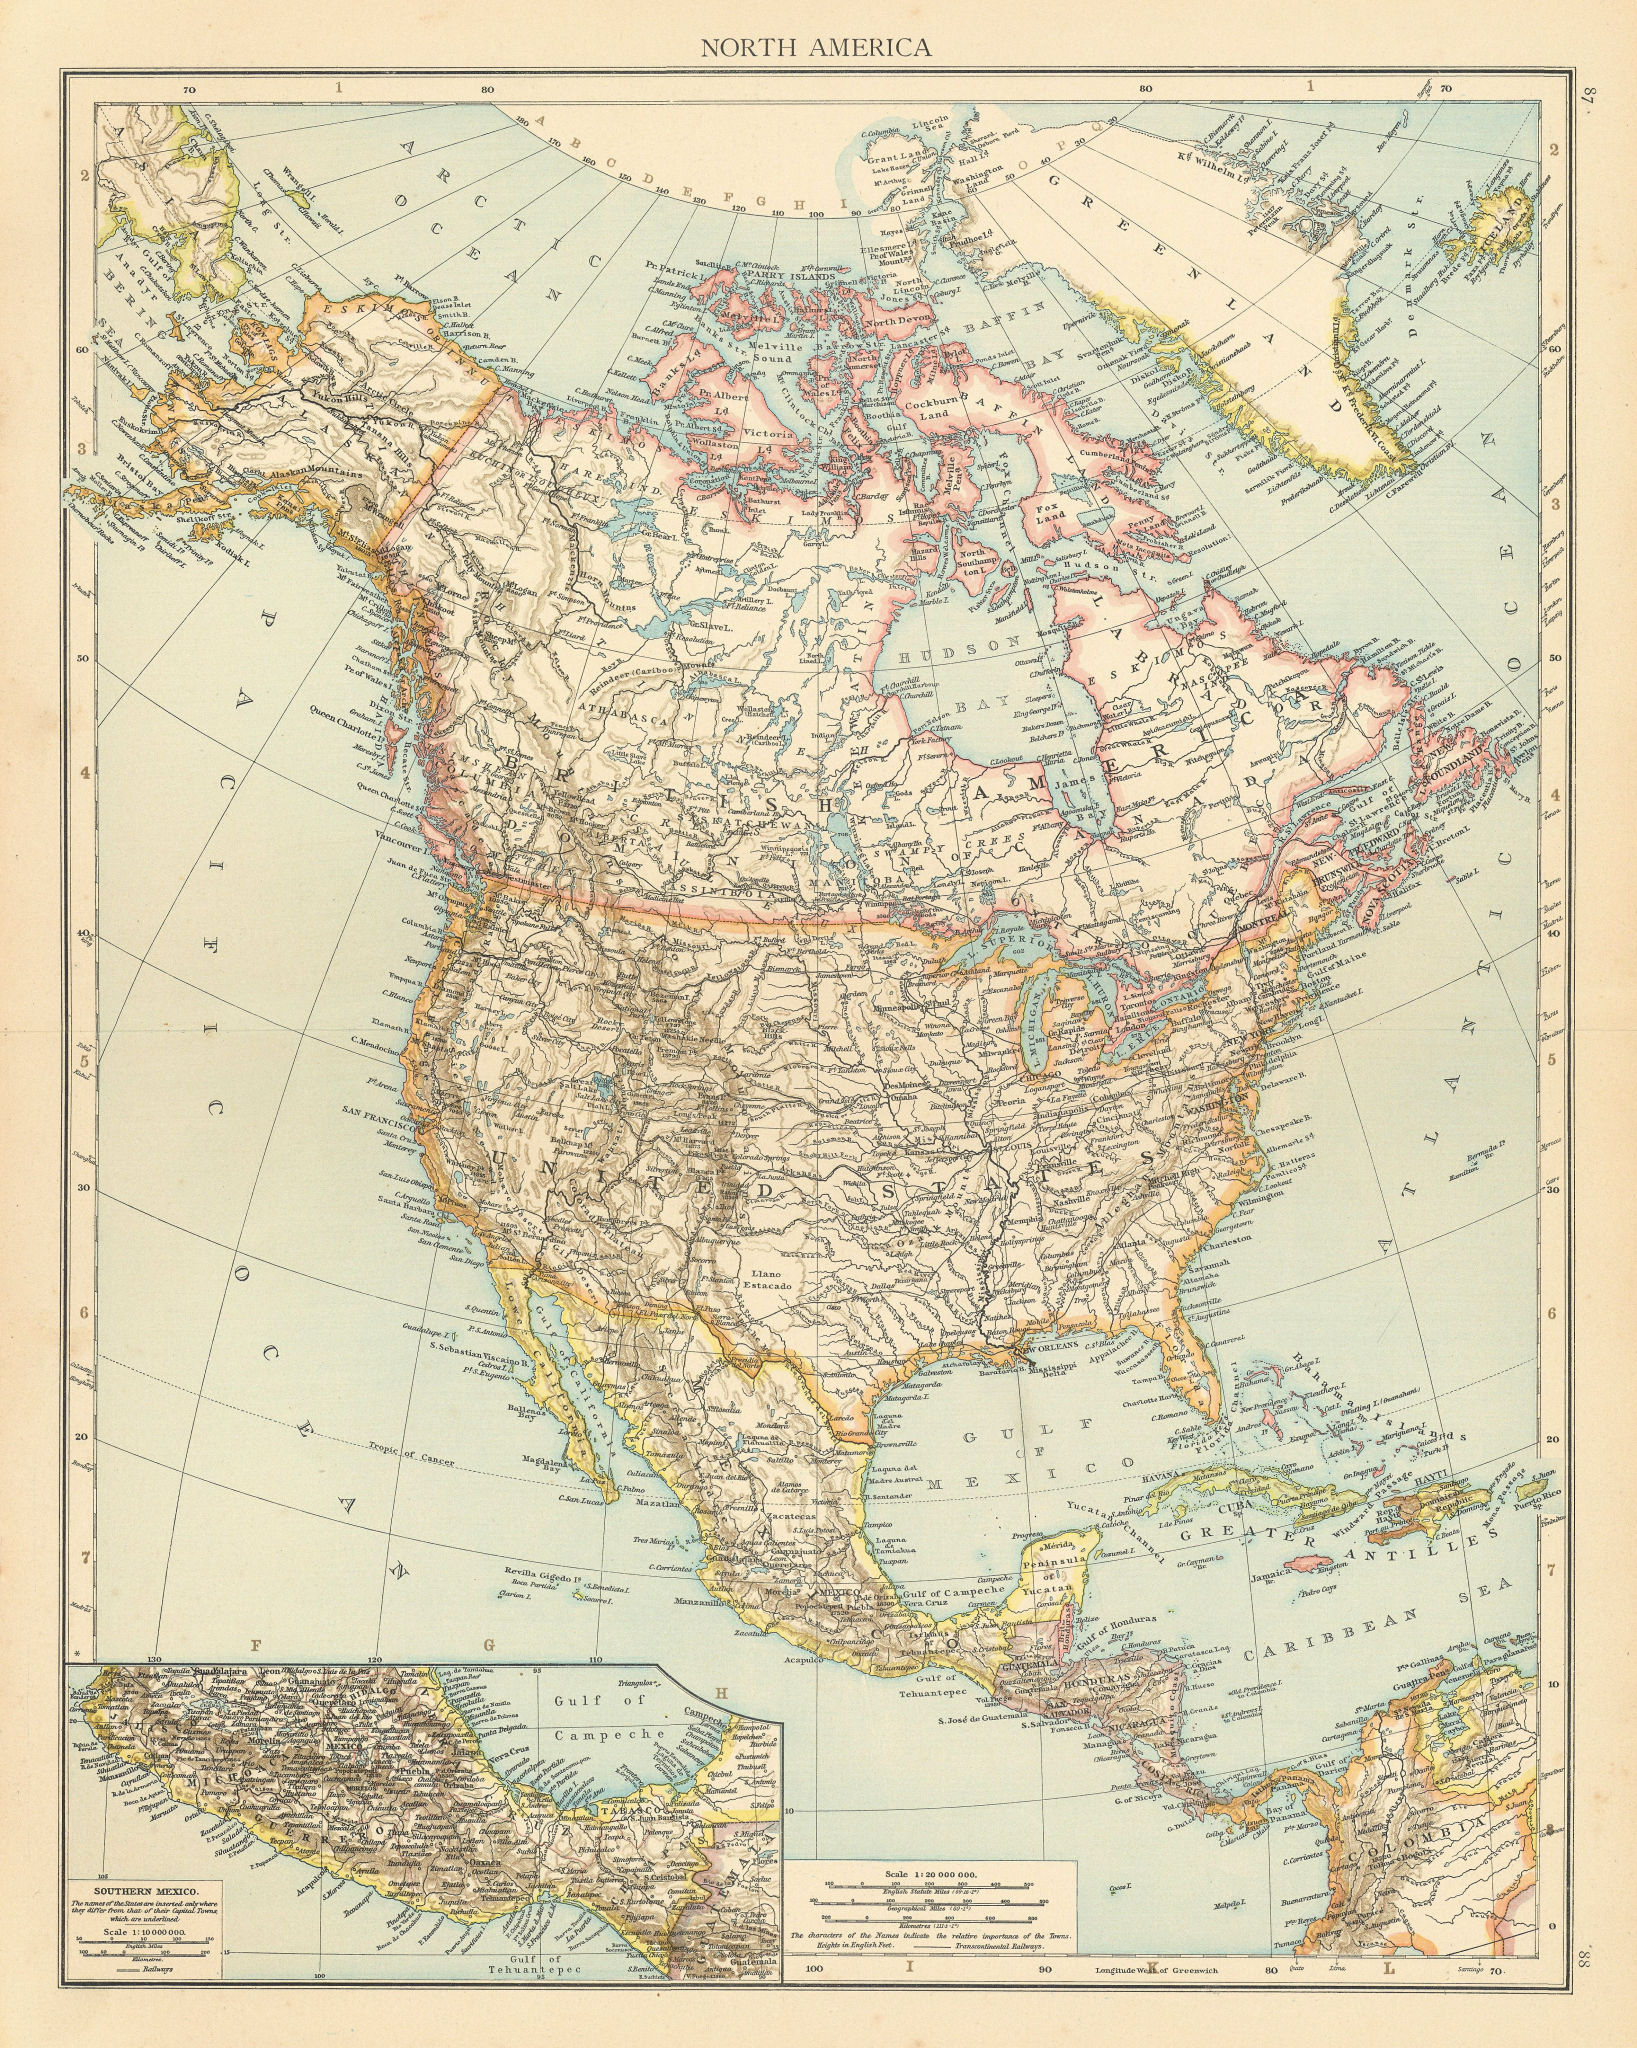 Associate Product North America showing railways. Central America. USA Canada. THE TIMES 1895 map